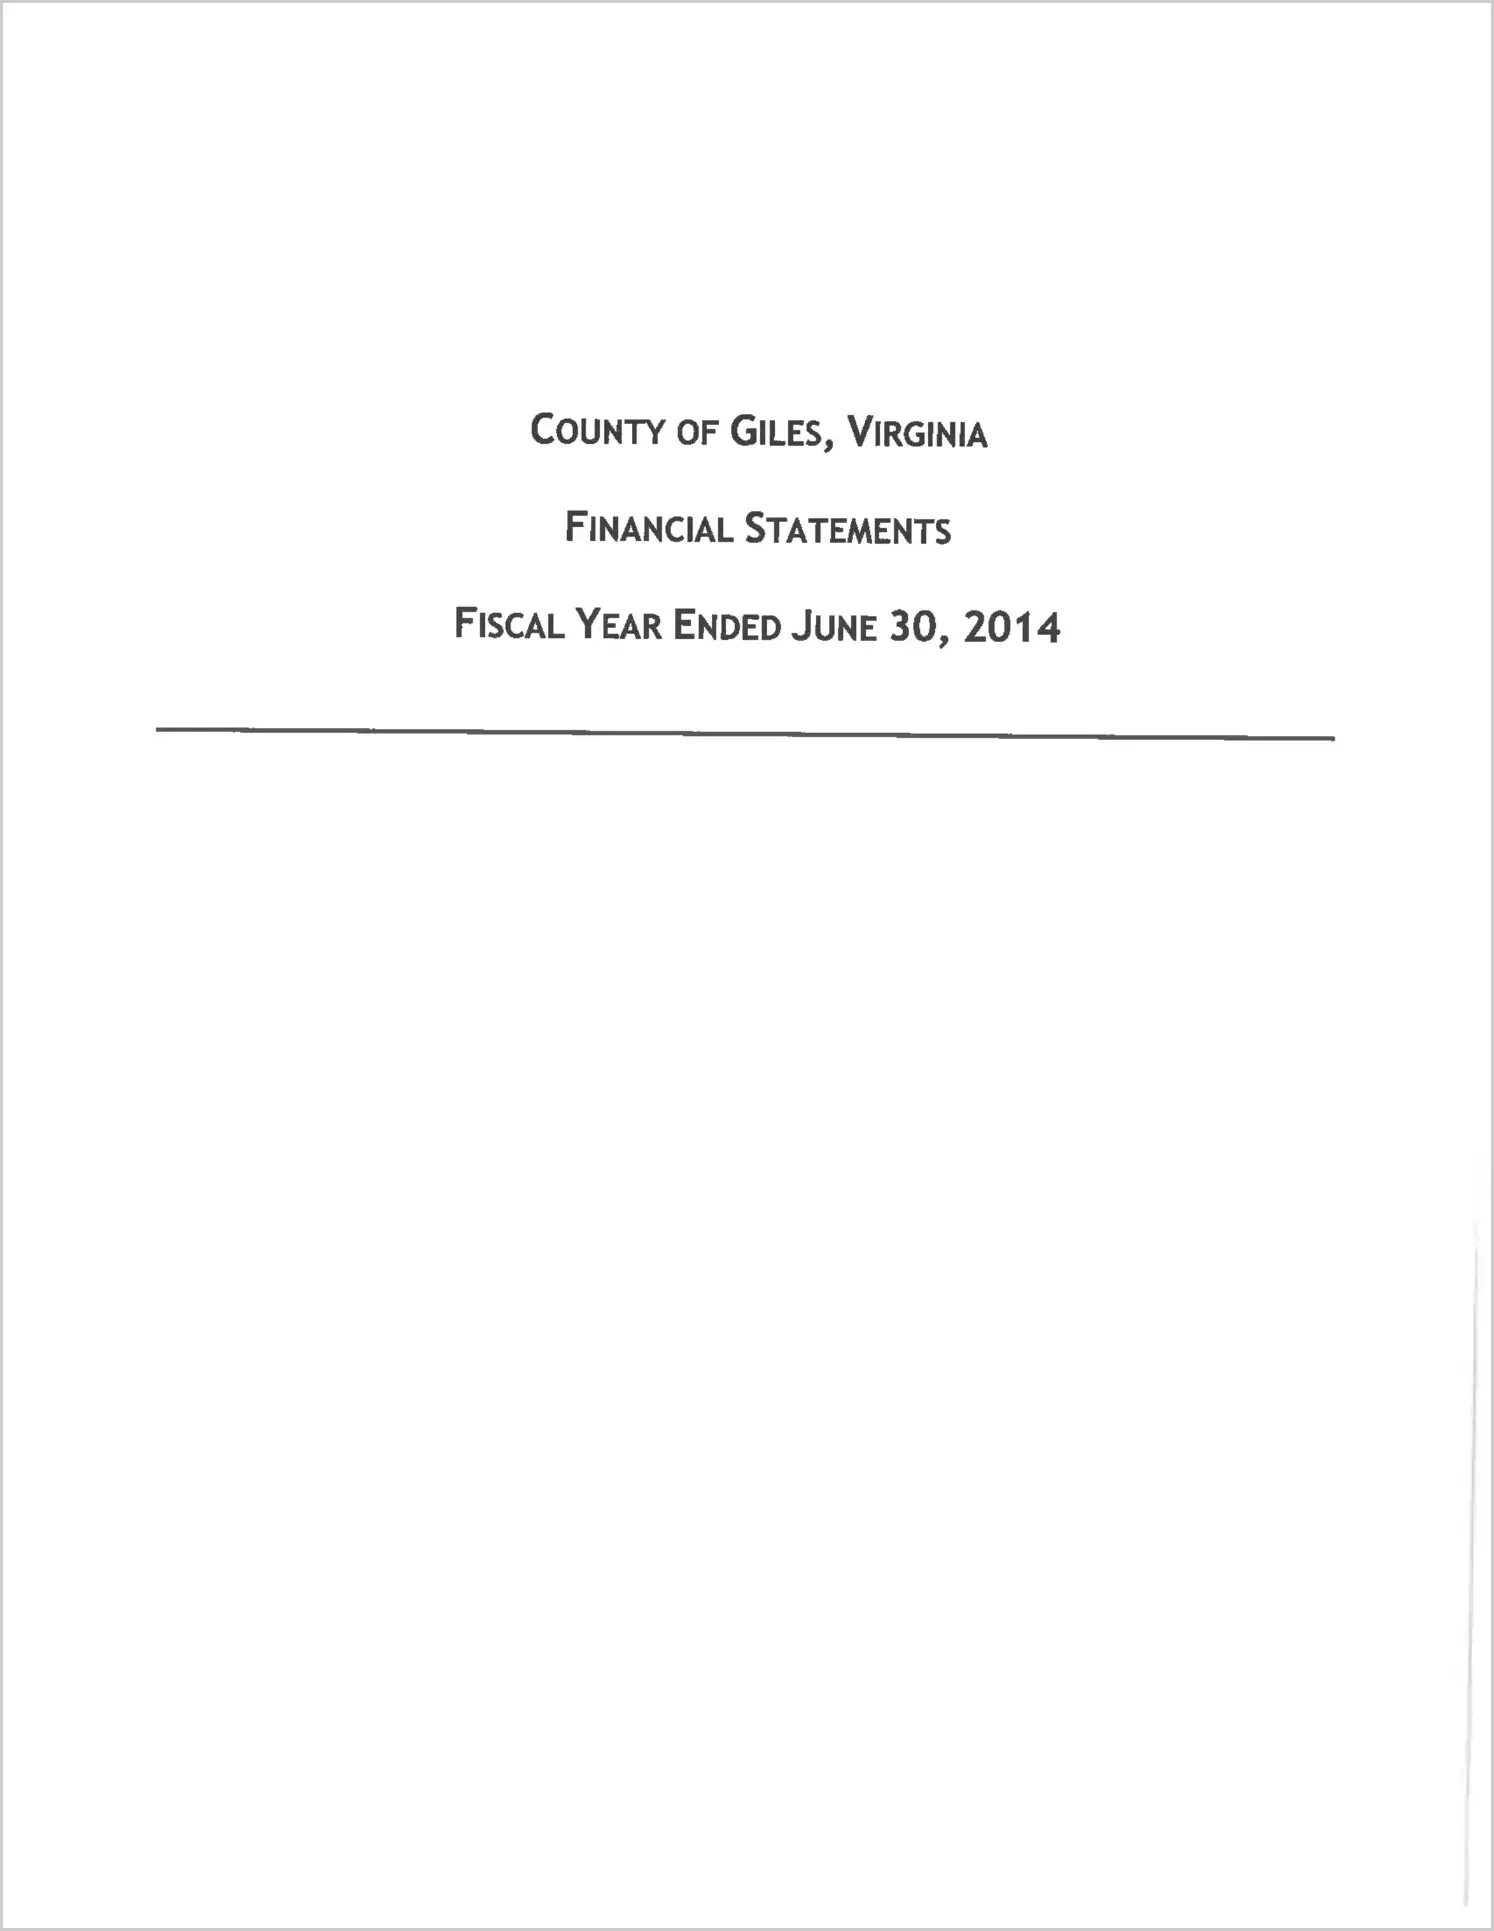 2014 Annual Financial Report for County of Giles